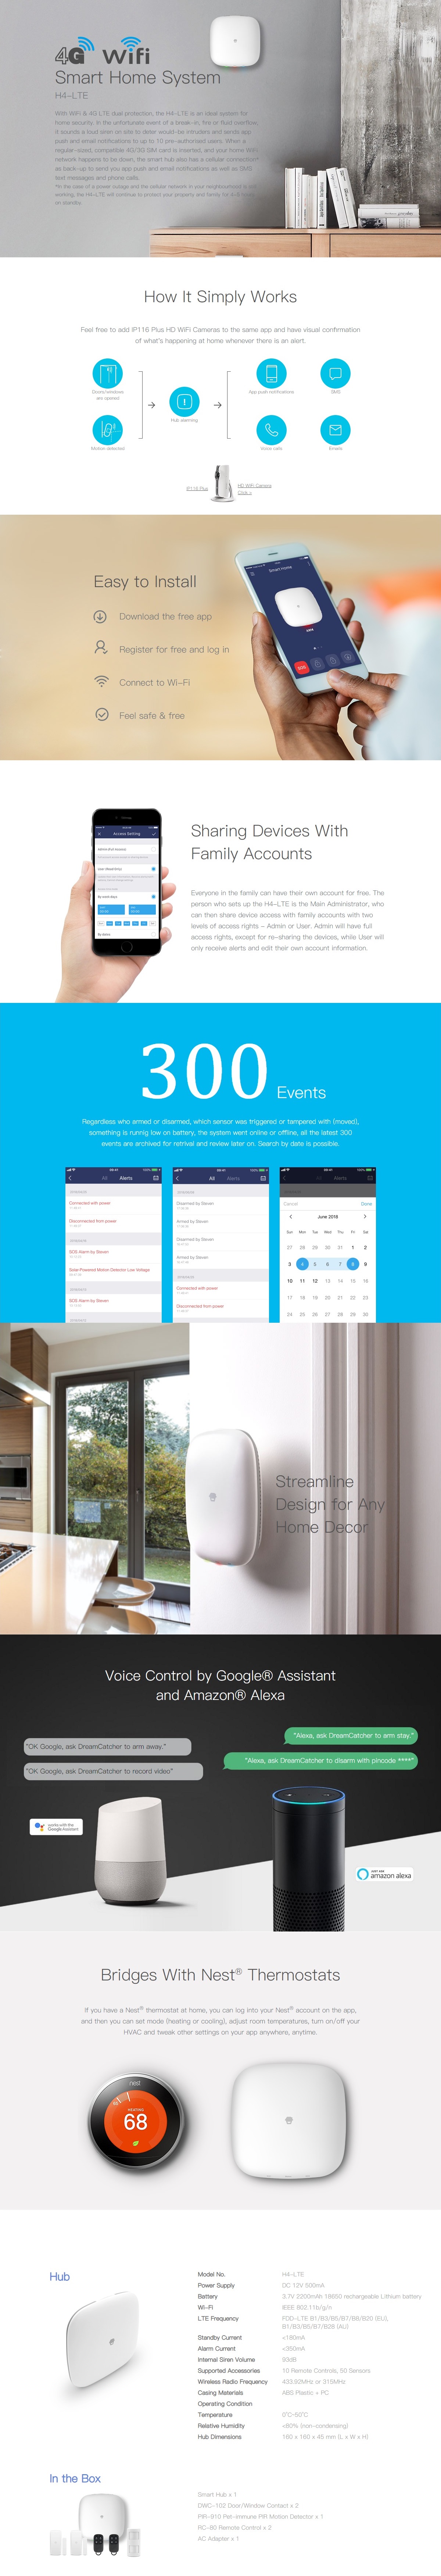 A large marketing image providing additional information about the product Chuango H4-LTE WiFi/Cellular Smart Home System - Additional alt info not provided